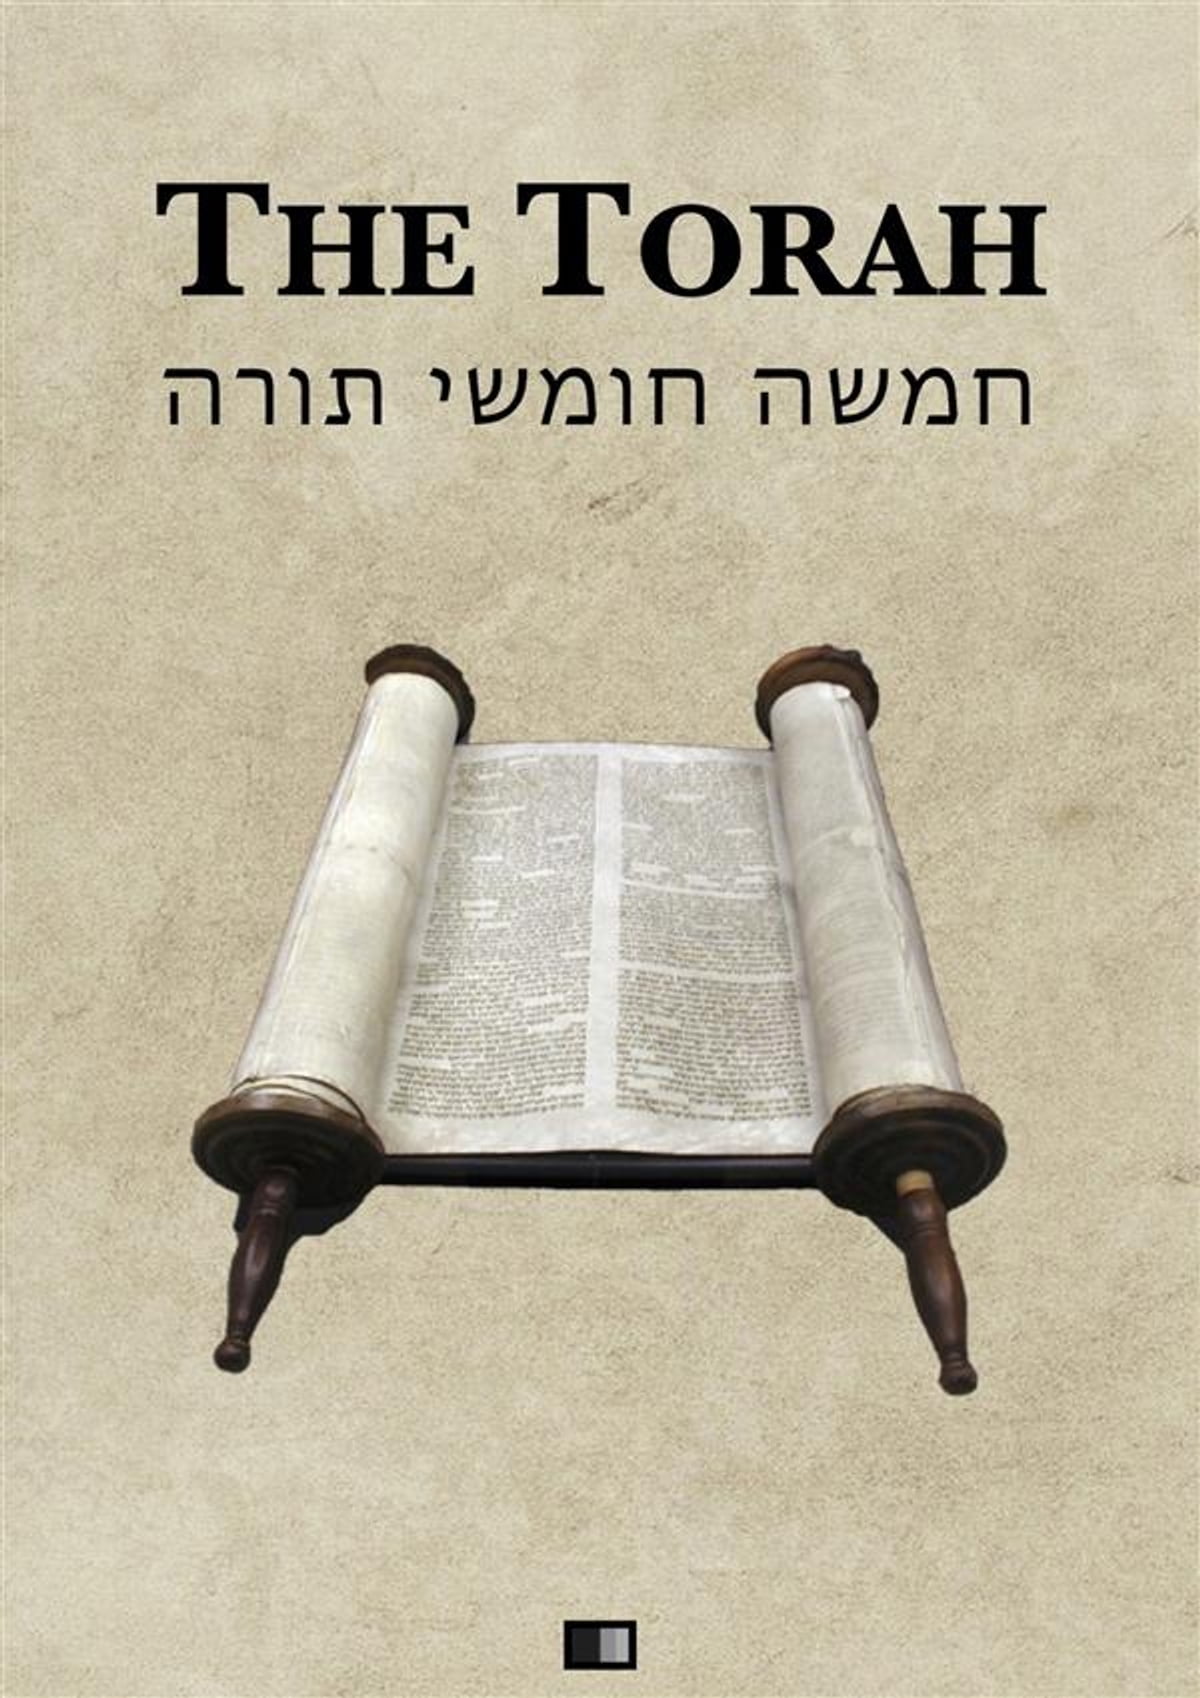 Torah: The Father of Israel-Part 3